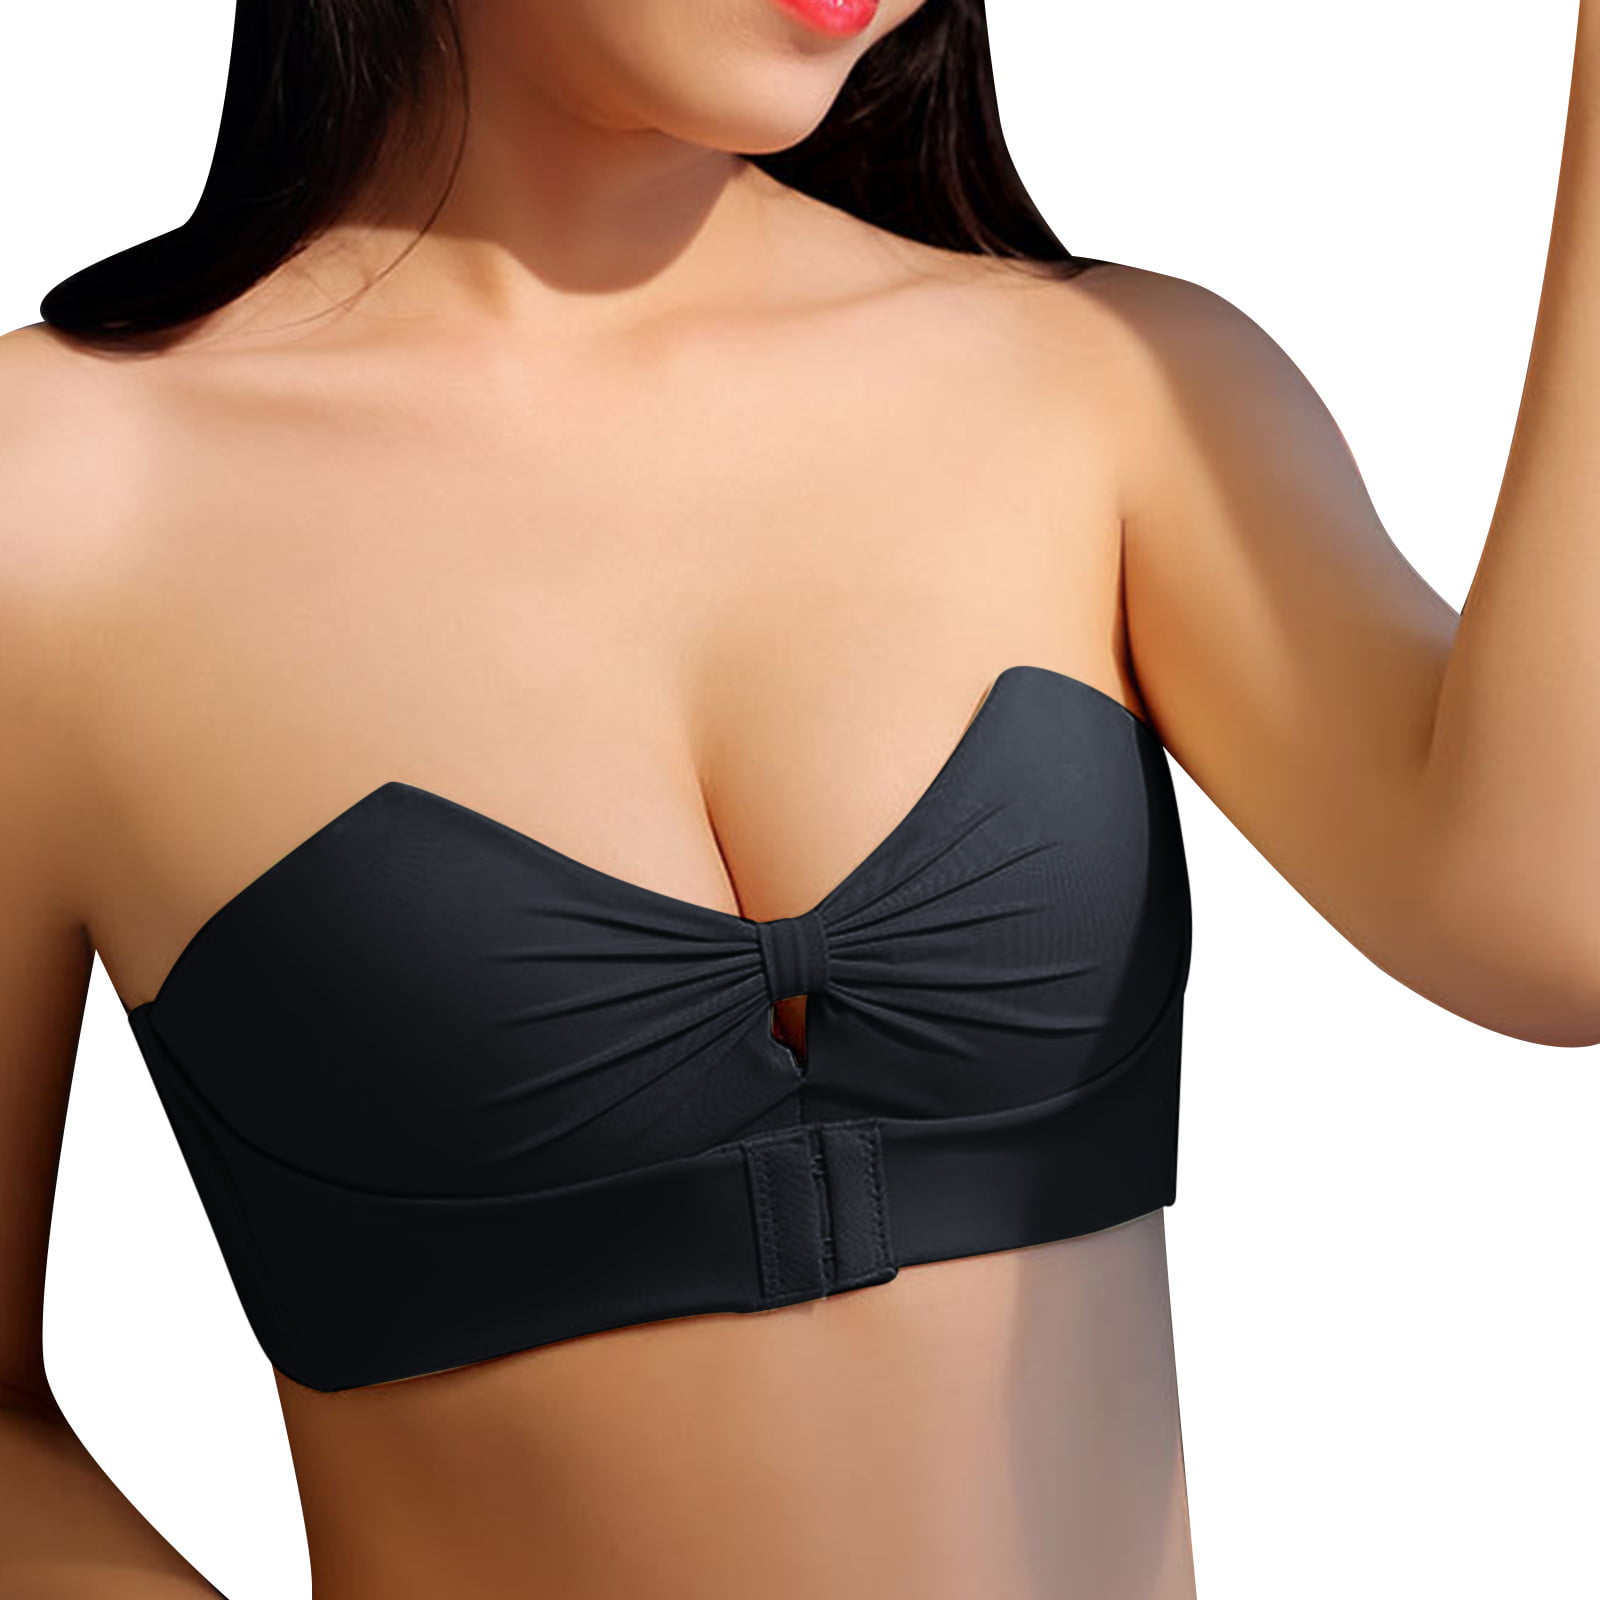 JGTDBPO Front Buckle Bra For Women Push Up Thin Bra Non-Slip Upper Support  Big Chest Show Small Invisible Bra Wedding Party Special Glossy Underwear 